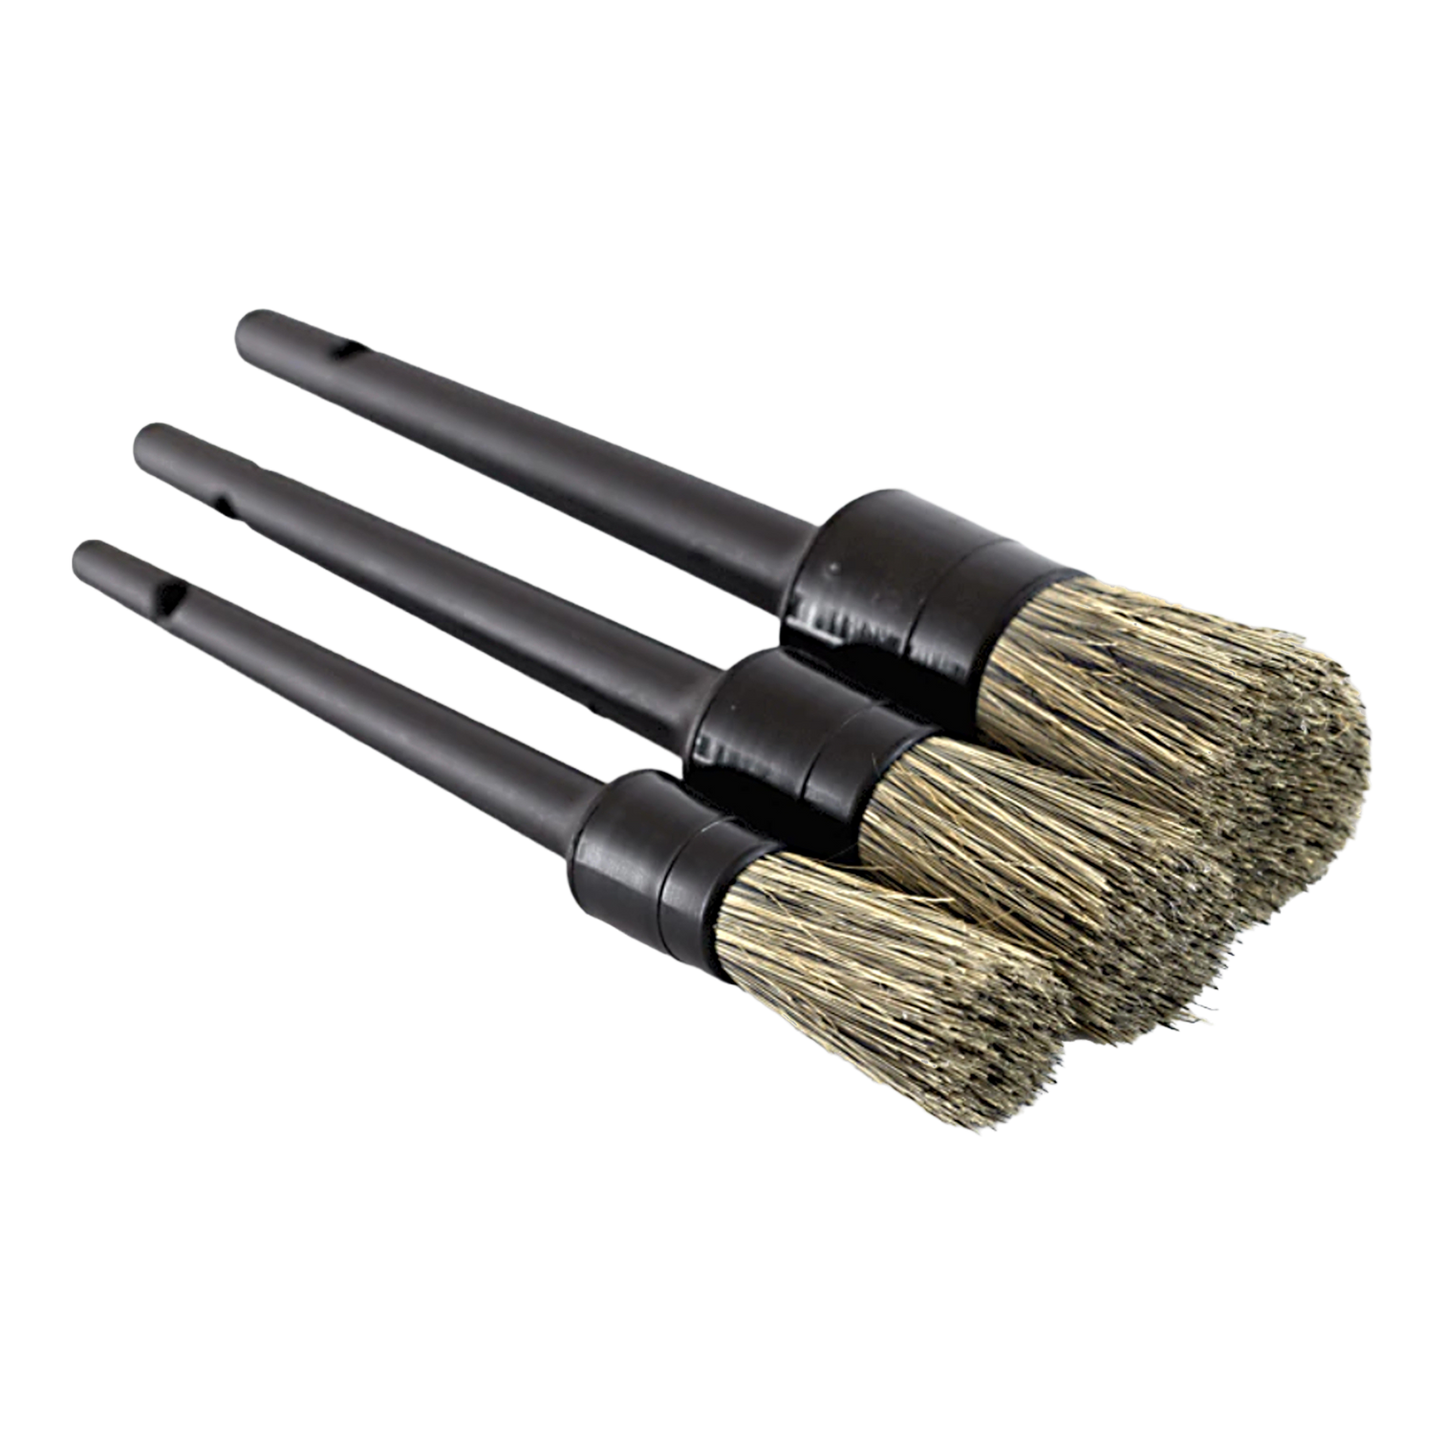 RALIS Detail Boars Hair Ultra Soft Car Detail Brushes Car Detailing Brush -  Set of 3 Pcs Different Sizes NO Metal Brush Parts for Cleaning Interior